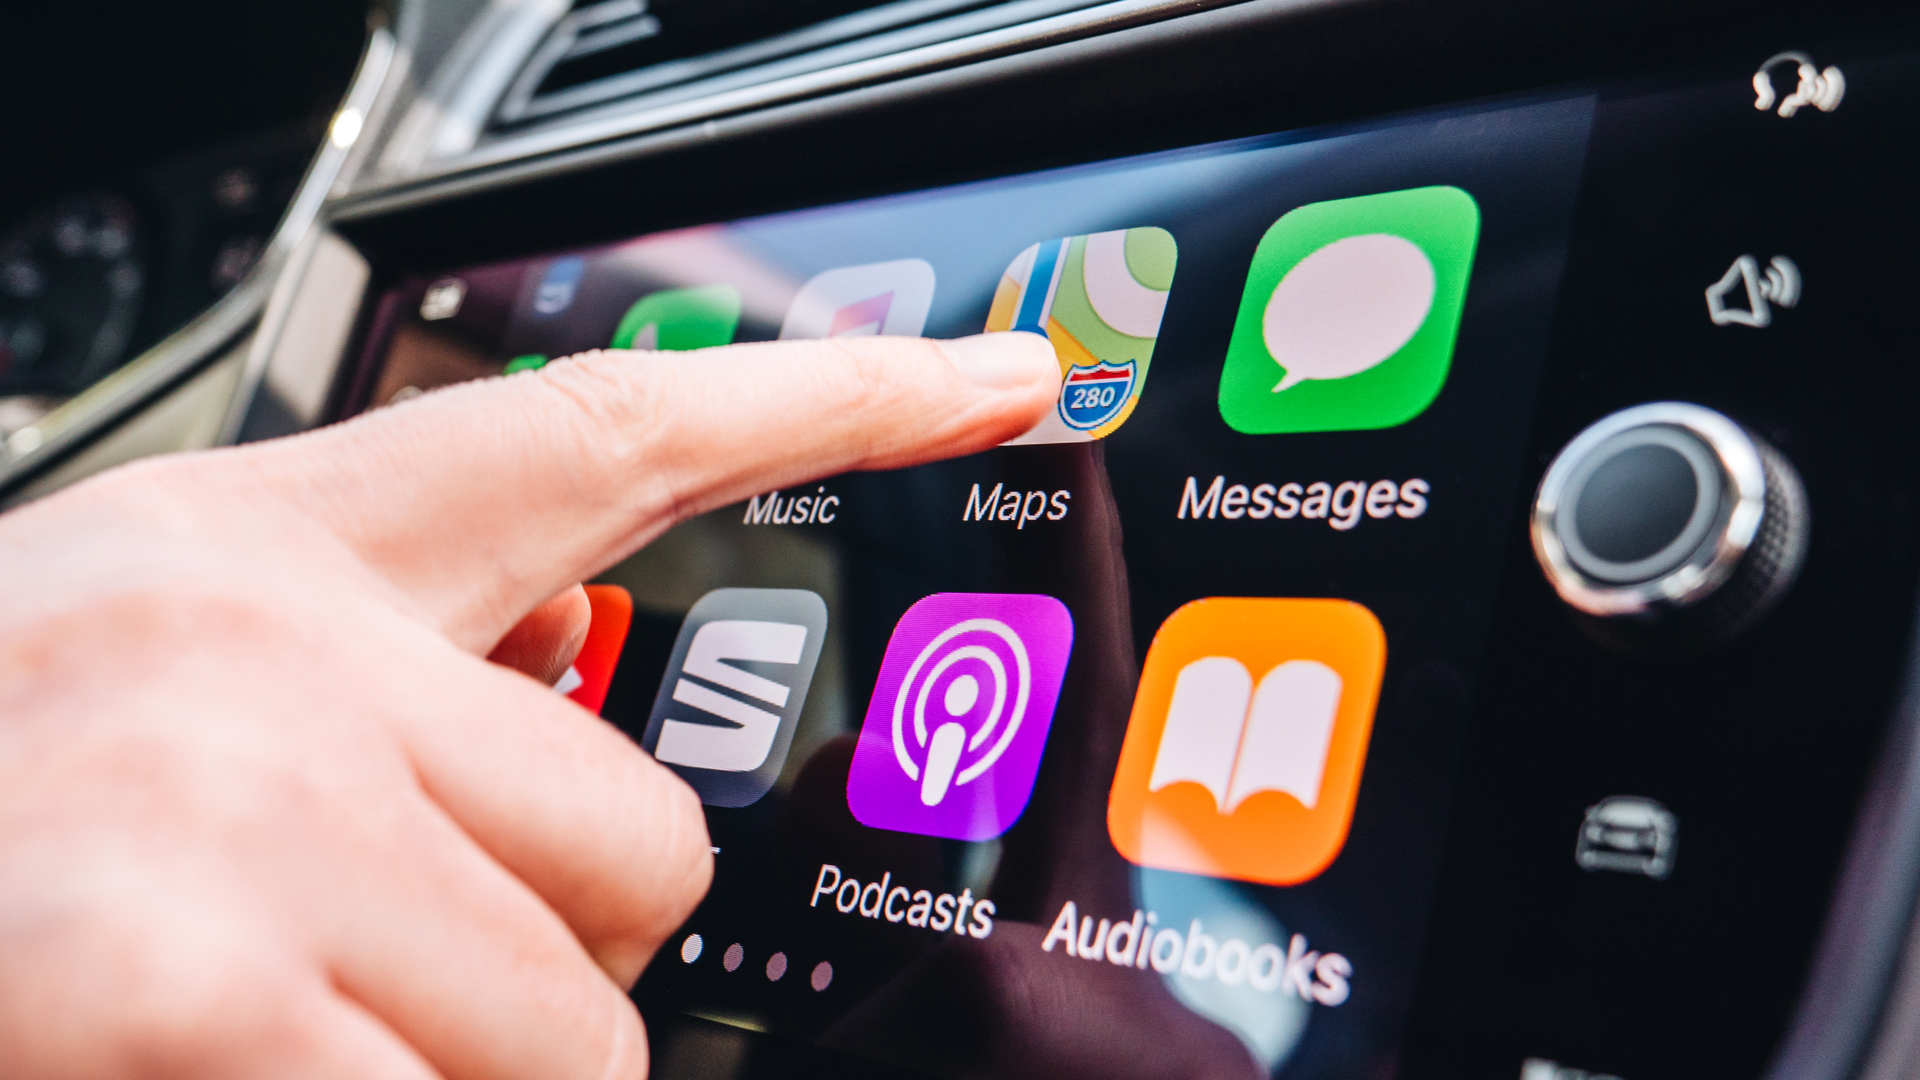 Apple CarPlay Could Soon Be Used to Pay for Gas